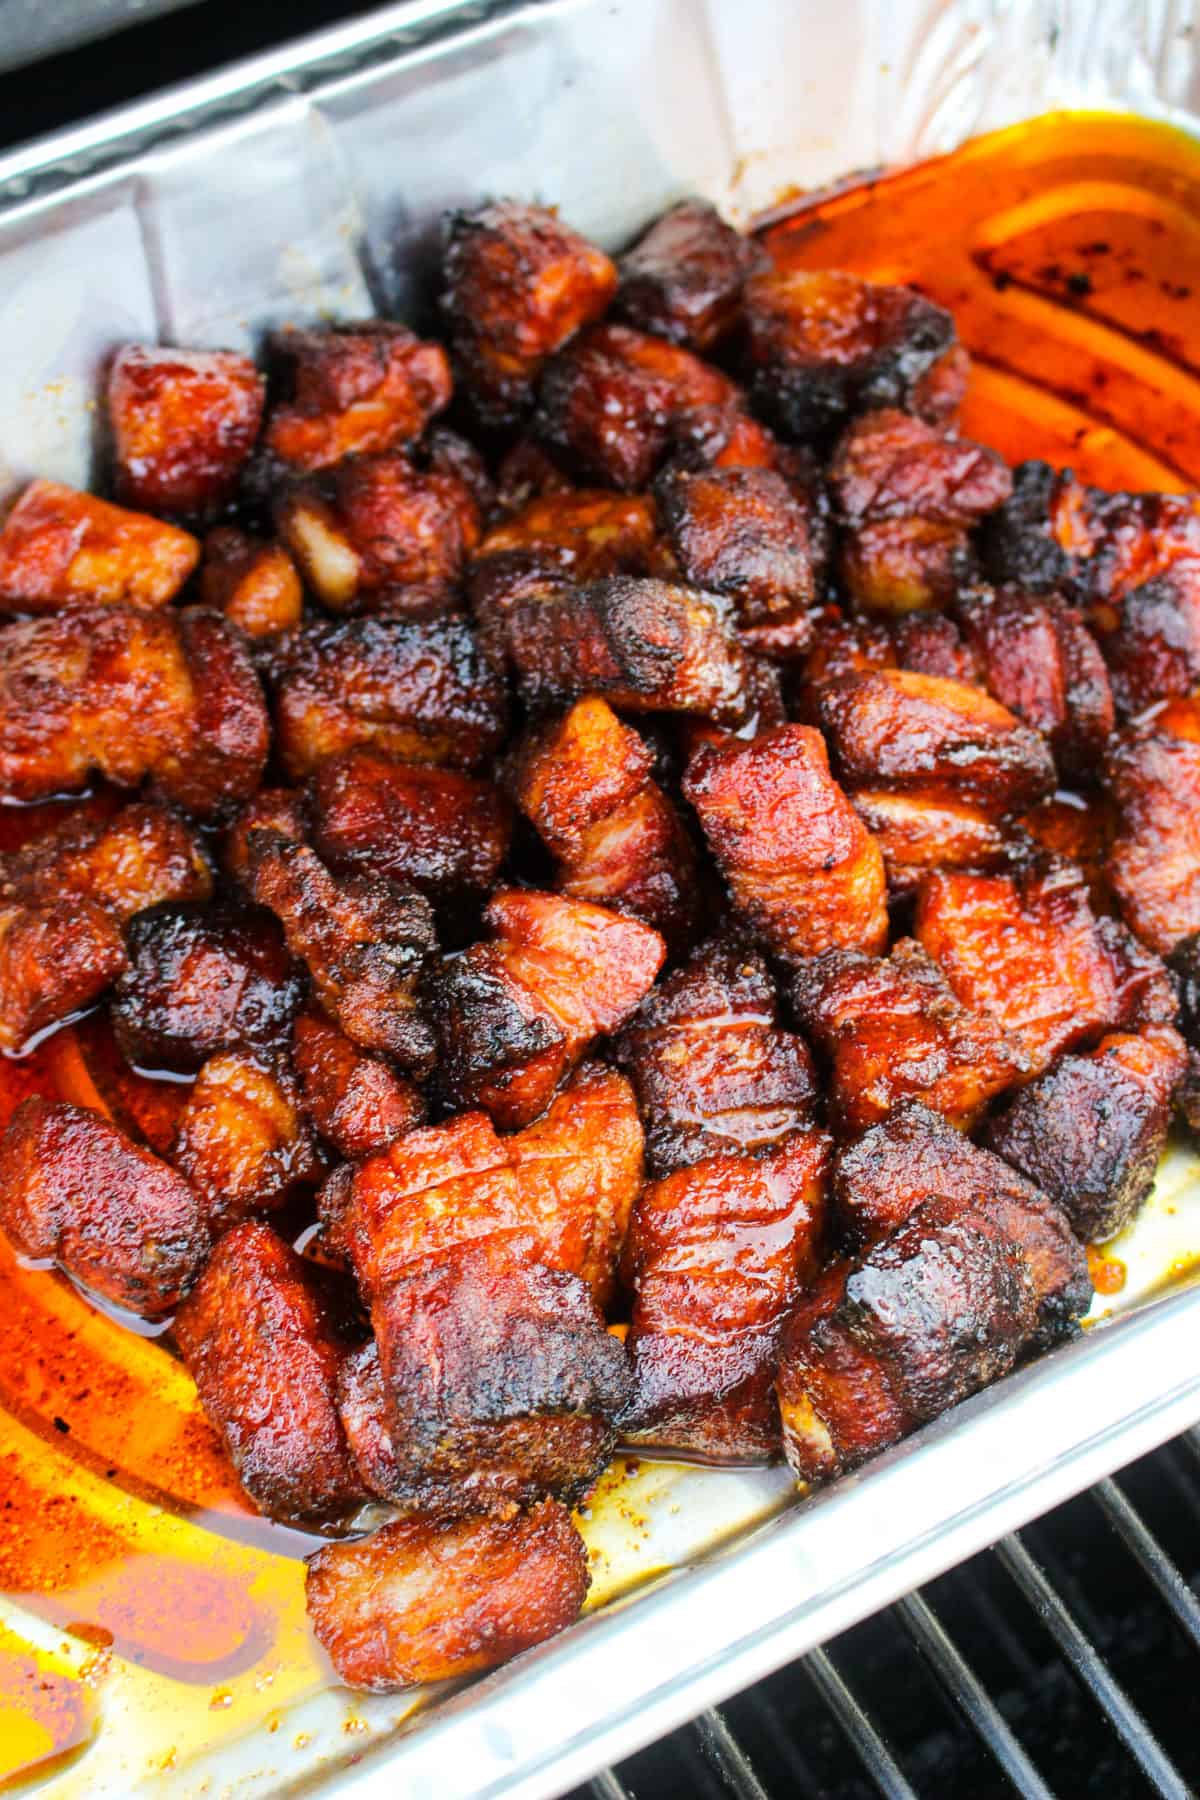 Honey Garlic Pork Belly Burnt Ends about to be pulled from the smoker.